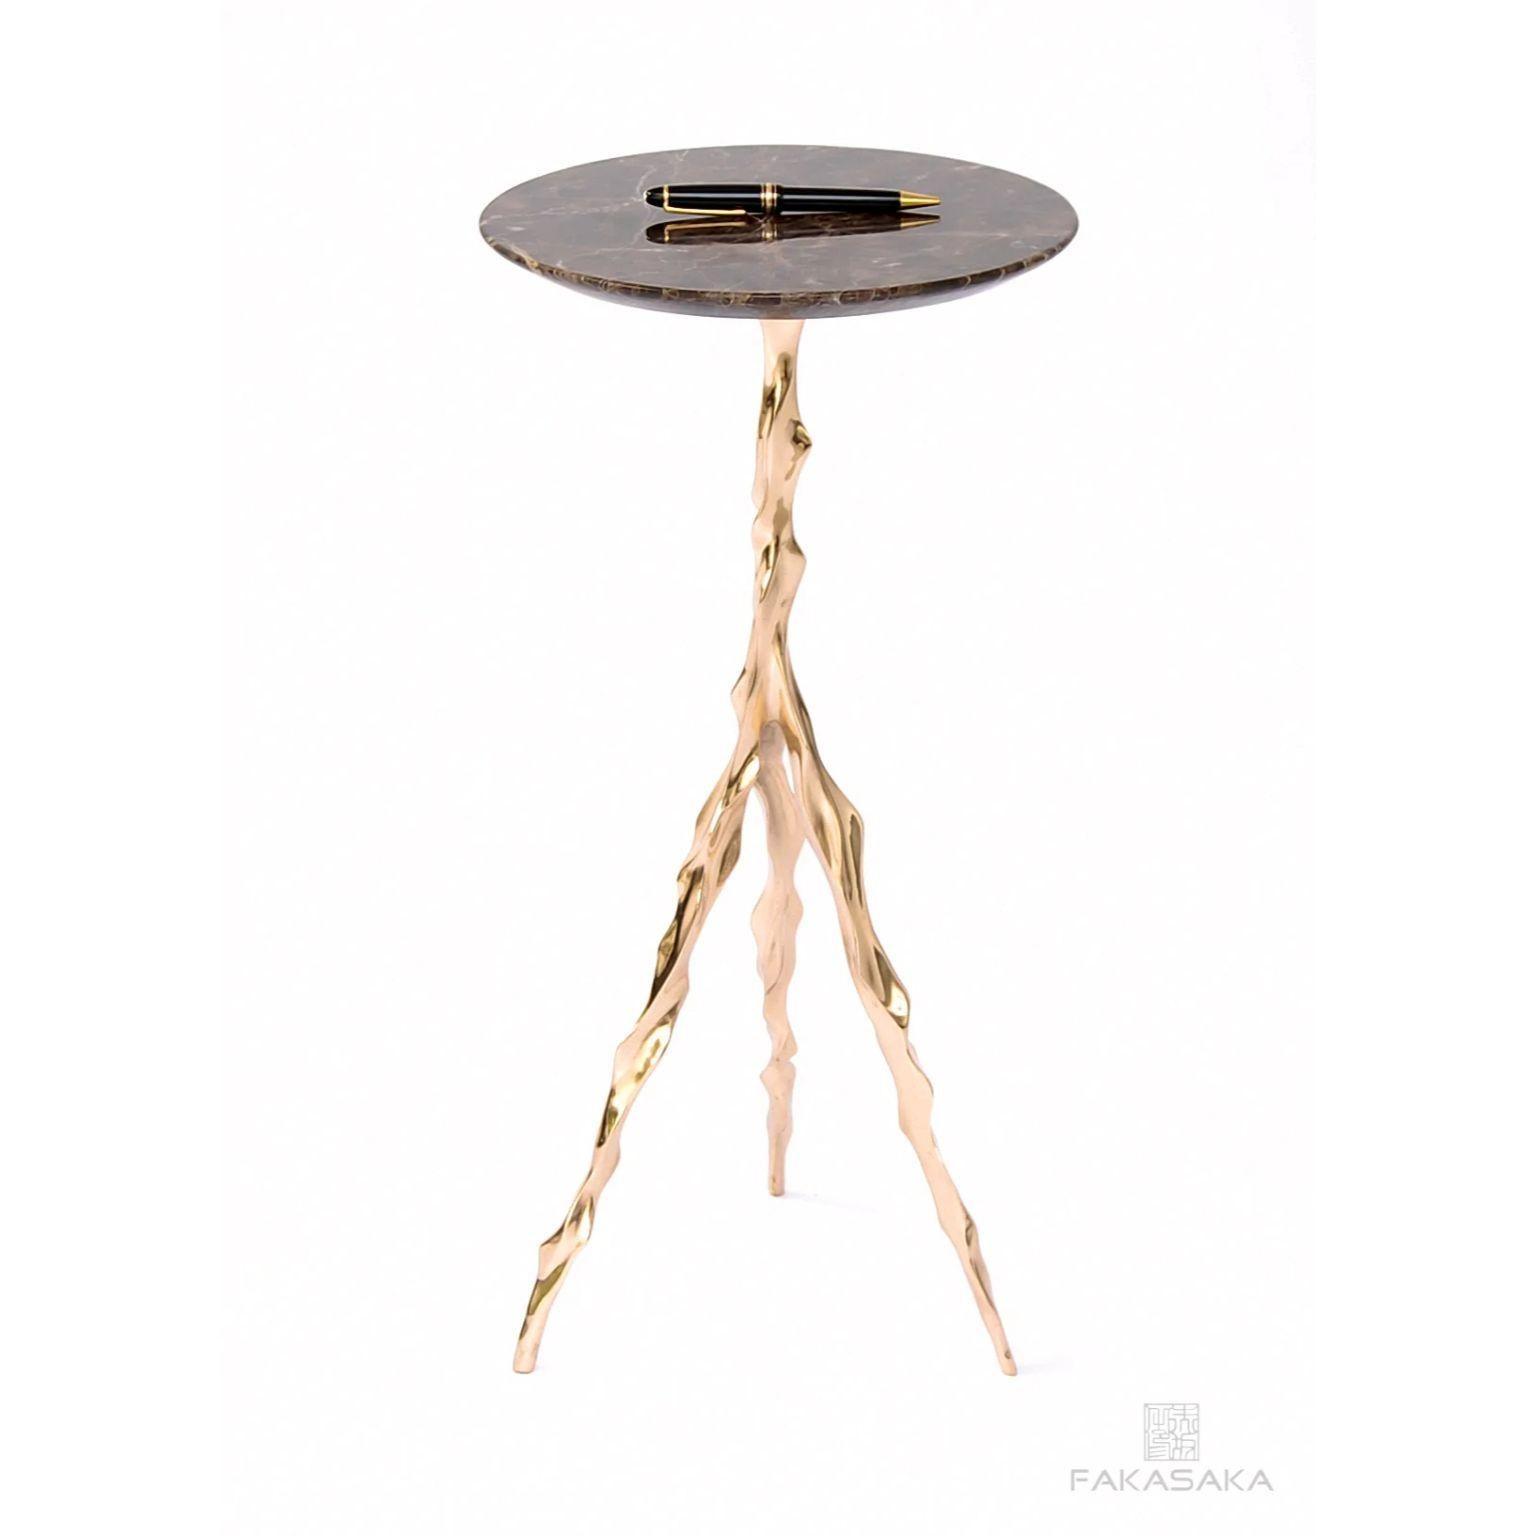 Modern Etta Drink Table with Marrom Imperial Marble Top by Fakasaka Design For Sale